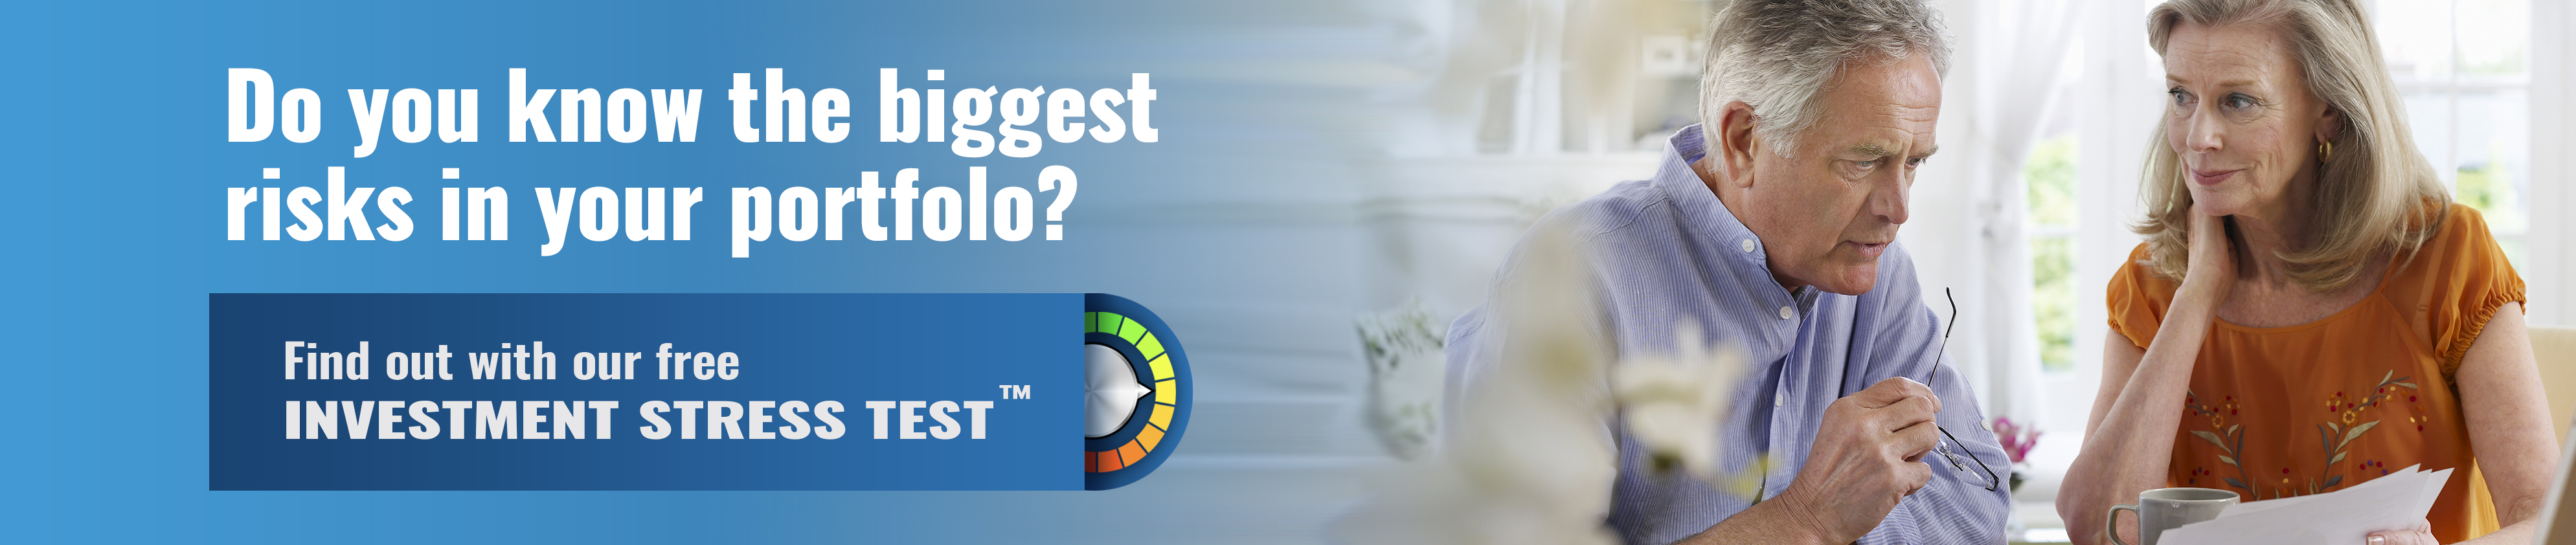 Do you know the biggest risks in your portfolio? Find out with our free Investment Stress Test. 